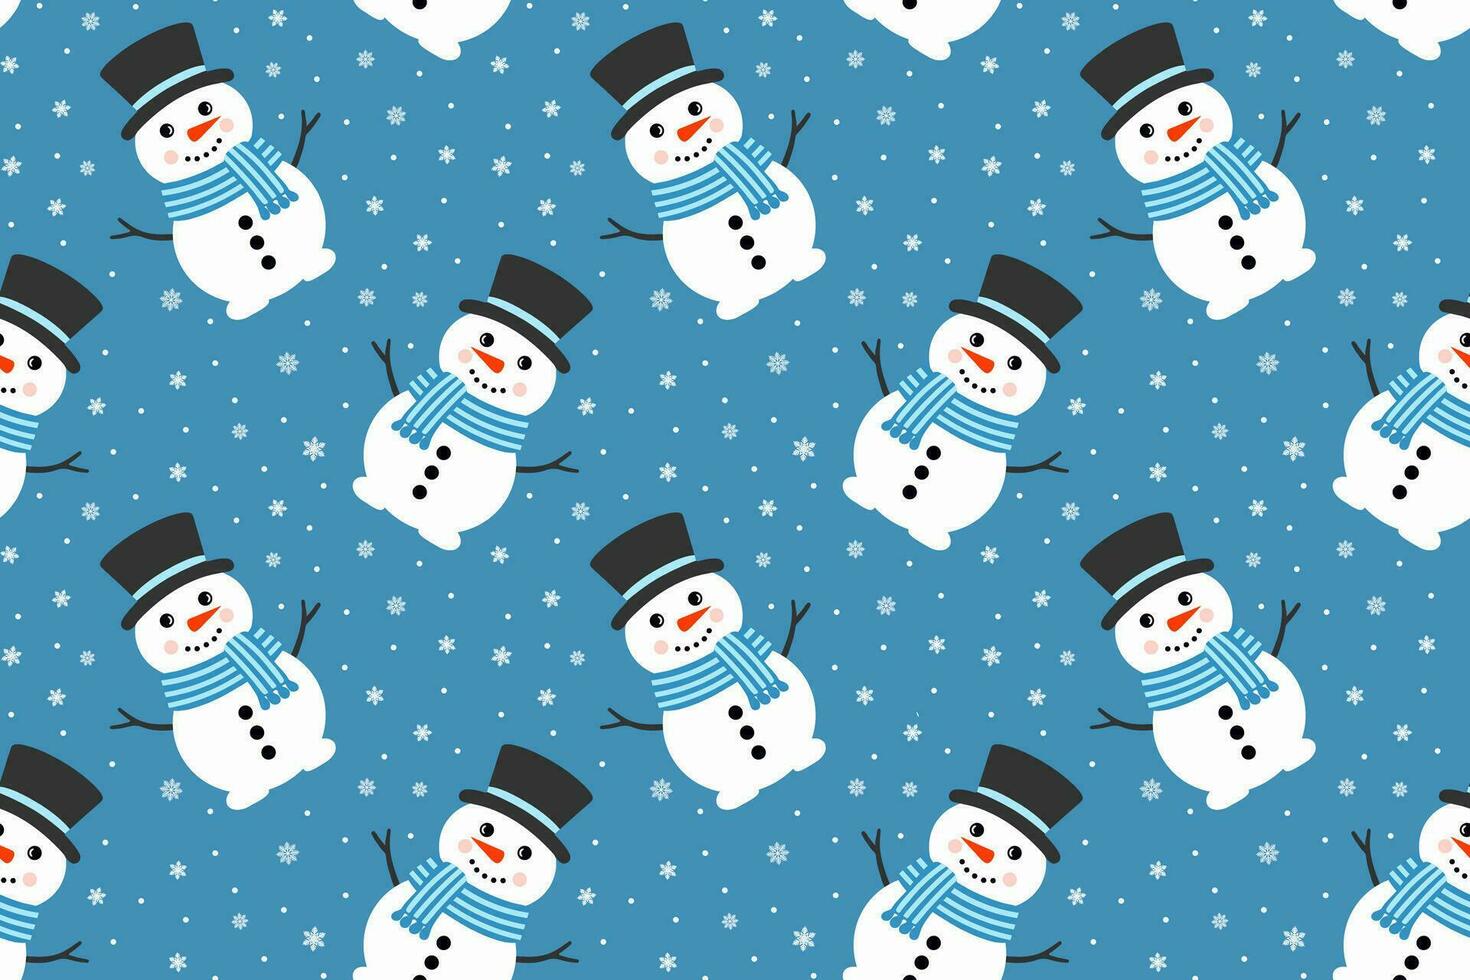 Cute Vector Snowman Seamless Pattern. Falling Snowflakes on Blue Background. Christmas and New Year Design